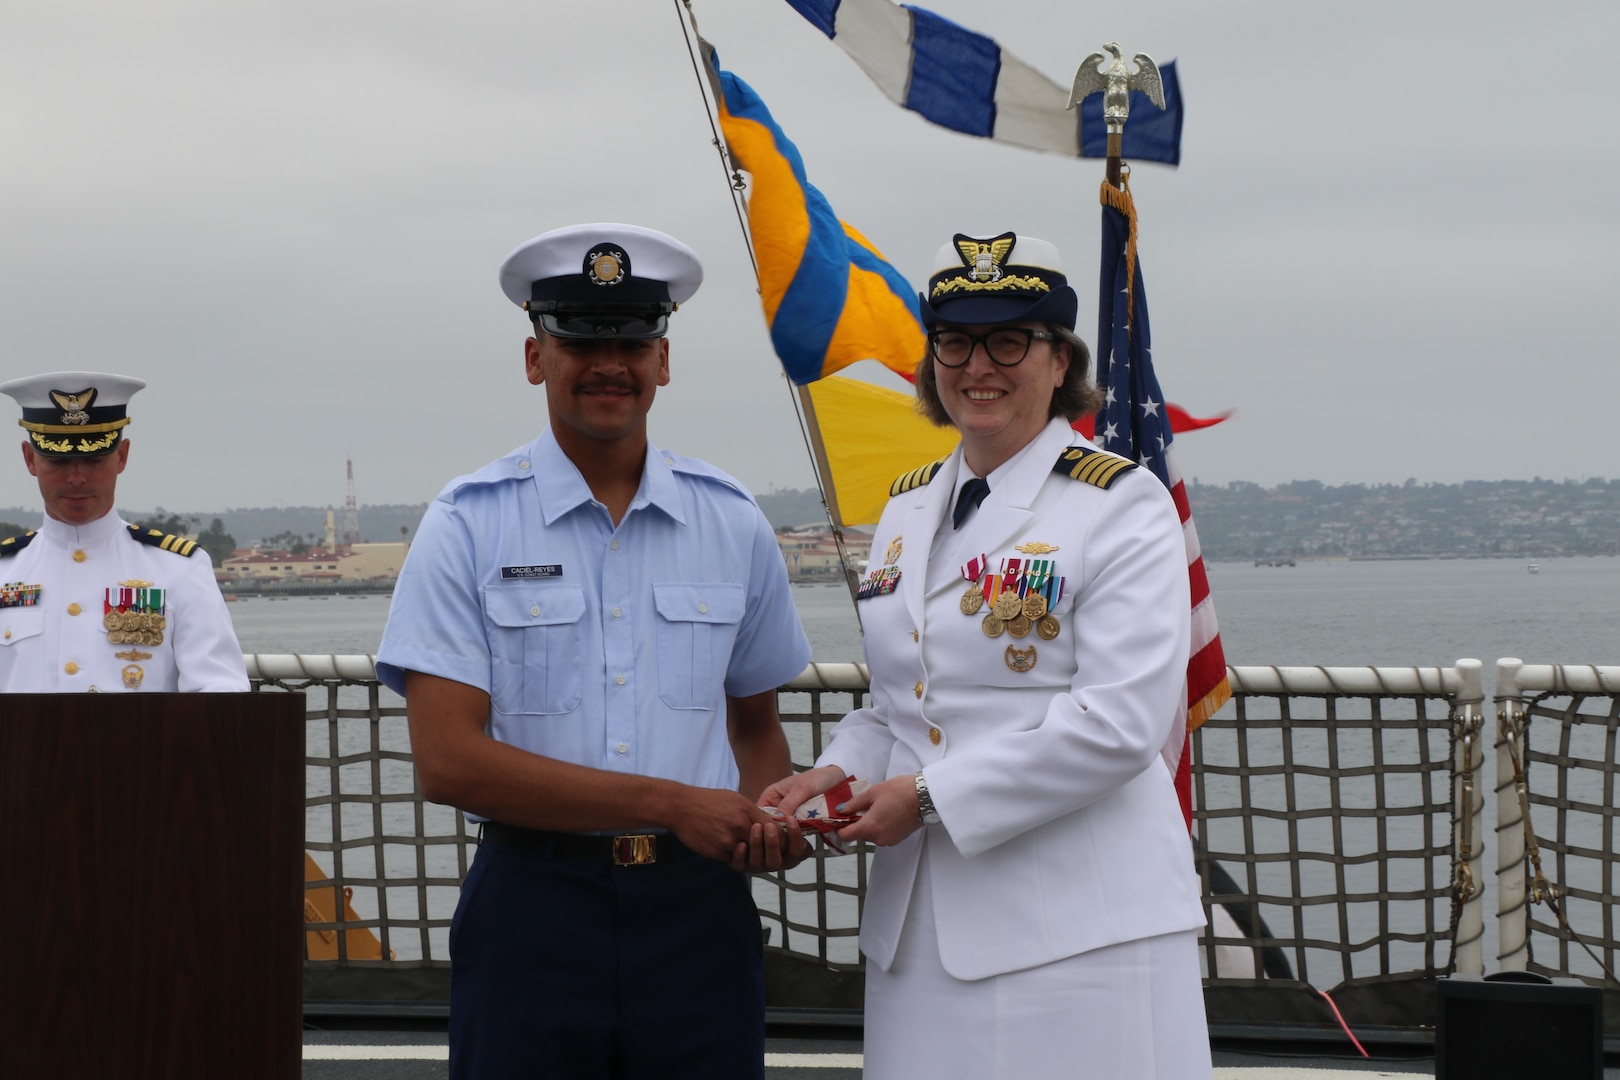 Seaman Fabio Caciel-Reyes (left), the most junior member of the U.S. Coast Guard Cutter Munro’s (WMSL 755) crew, presents Capt. Rula Deisher (right) with a commissioning pennant during Munro’s change of command ceremony in San Diego, May 30, 2024. Vice Adm. Andrew J. Tiongson, Commander, U.S. Coast Guard Pacific Area, presided over the ceremony in which Capt. James O’Mara relieved Deisher as Munro’s commanding officer. U.S. Coast Guard photo by Ensign Samika Lewis.